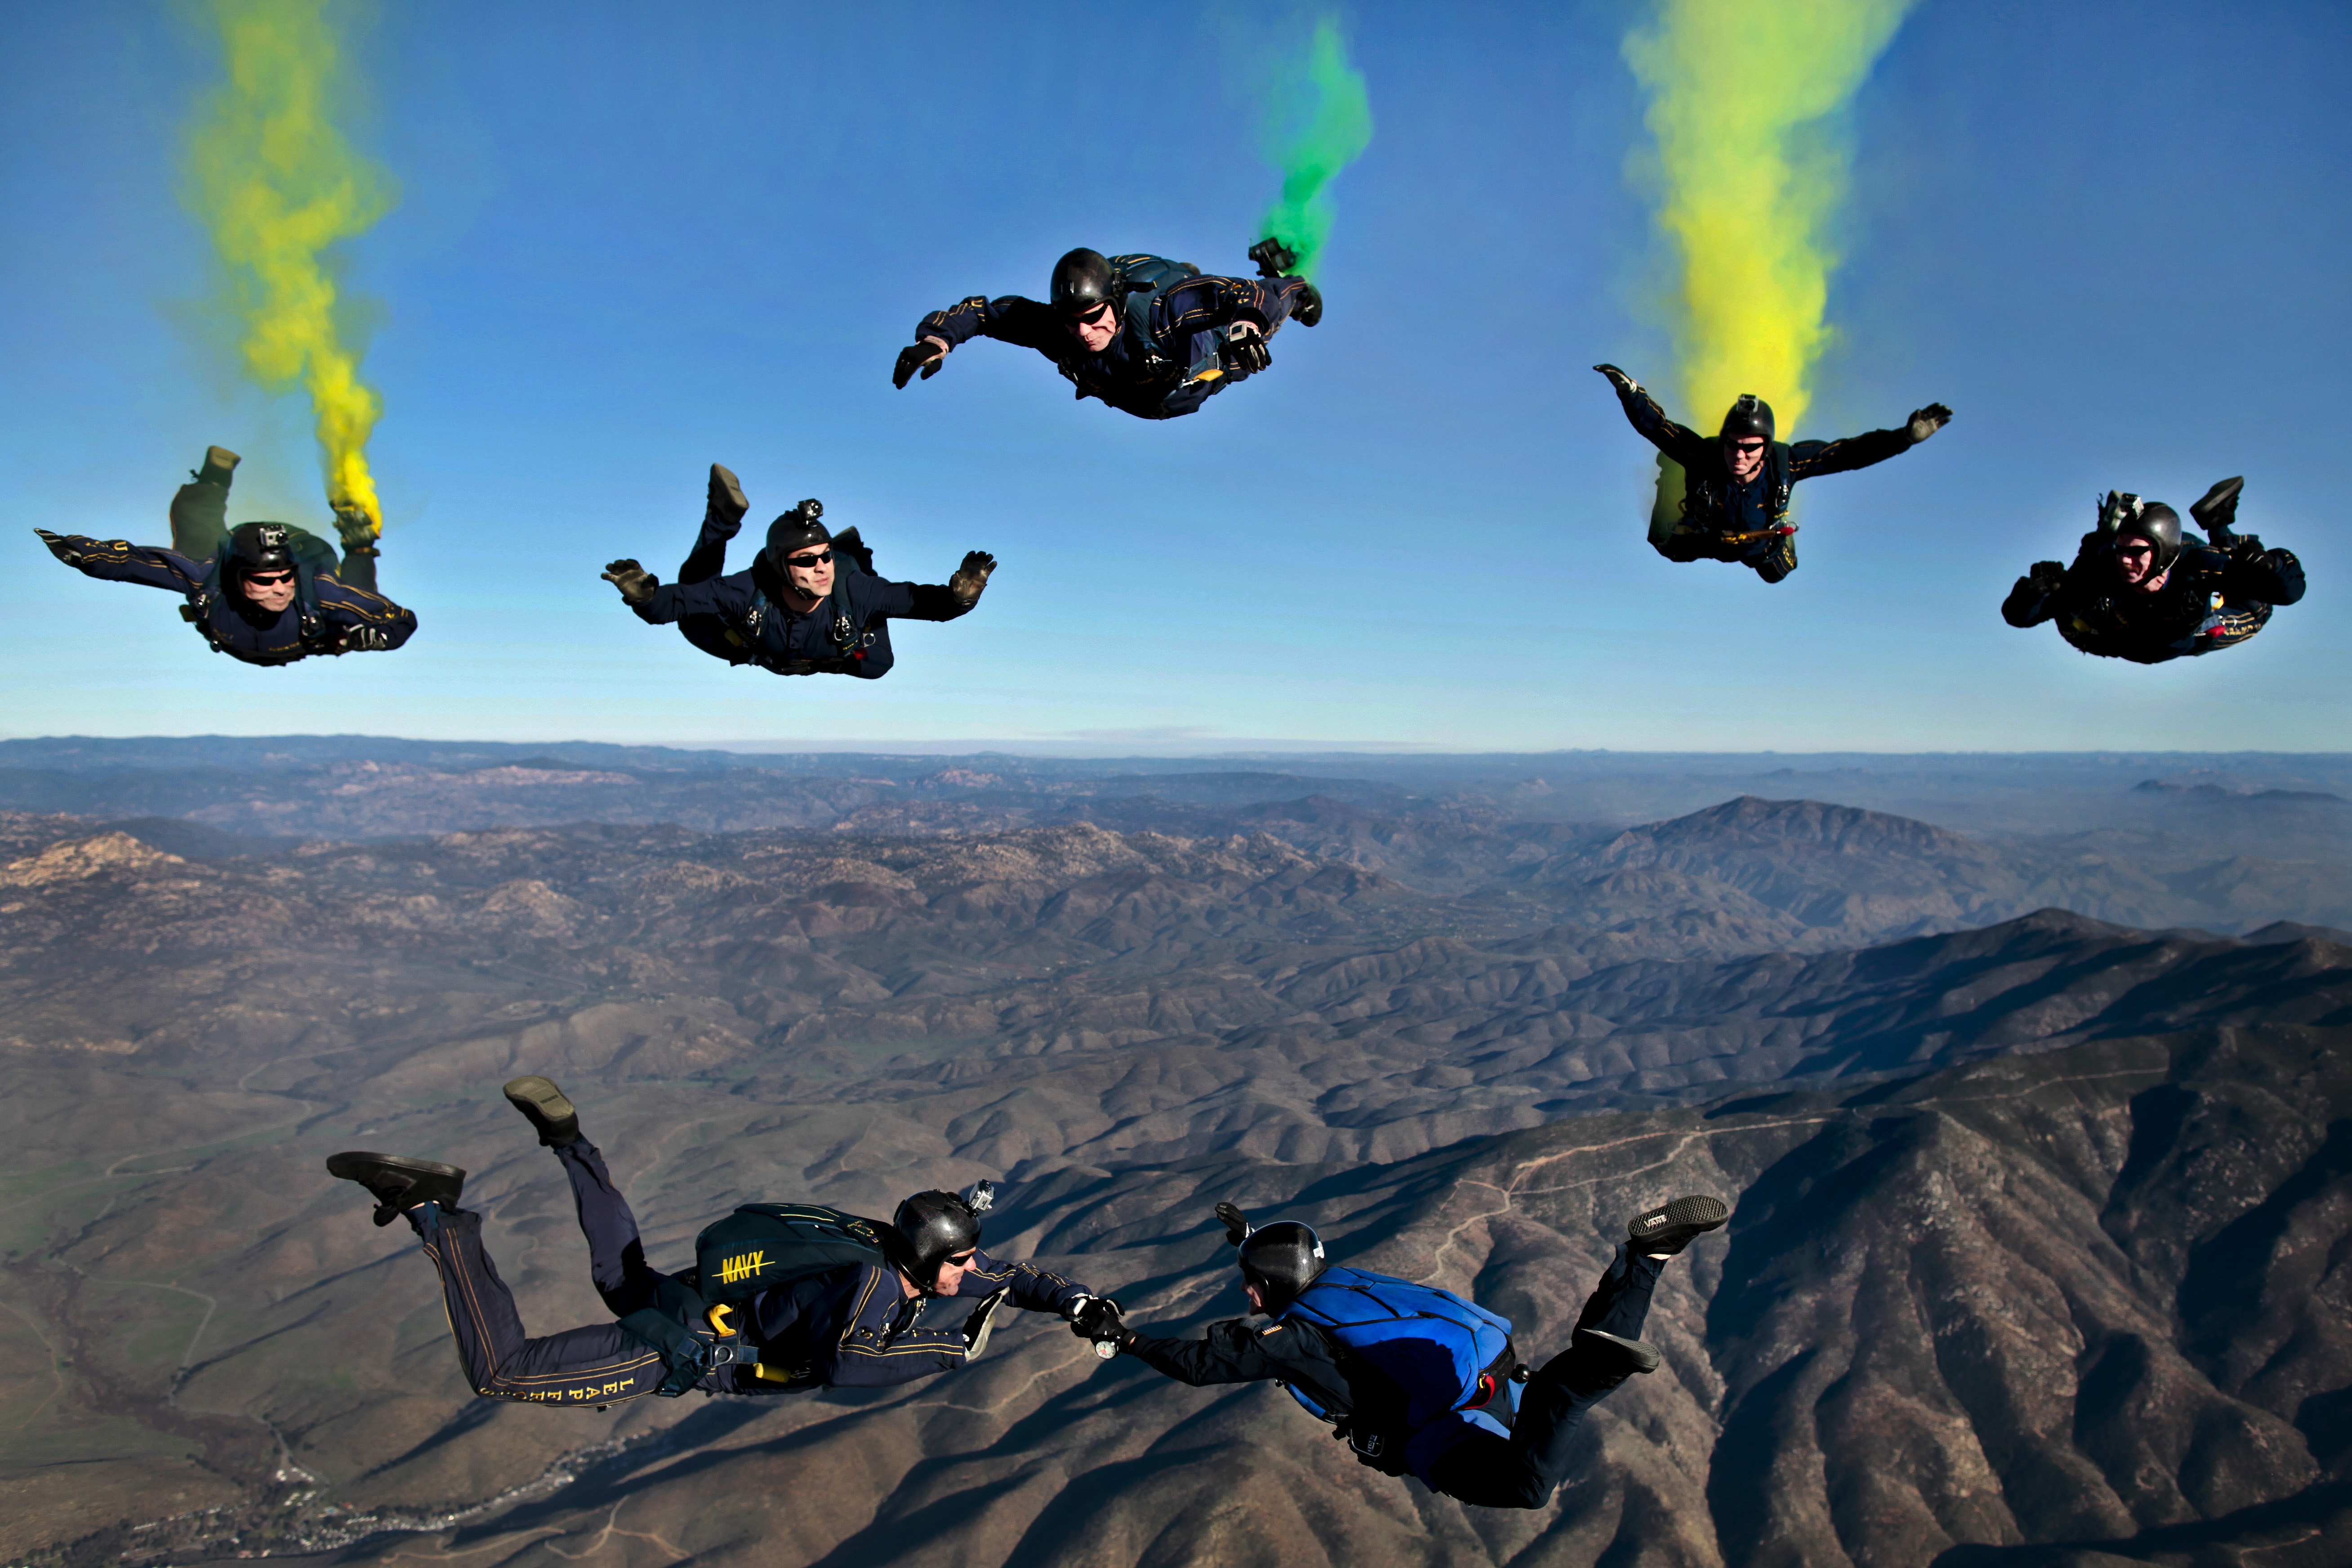 skydiving activity